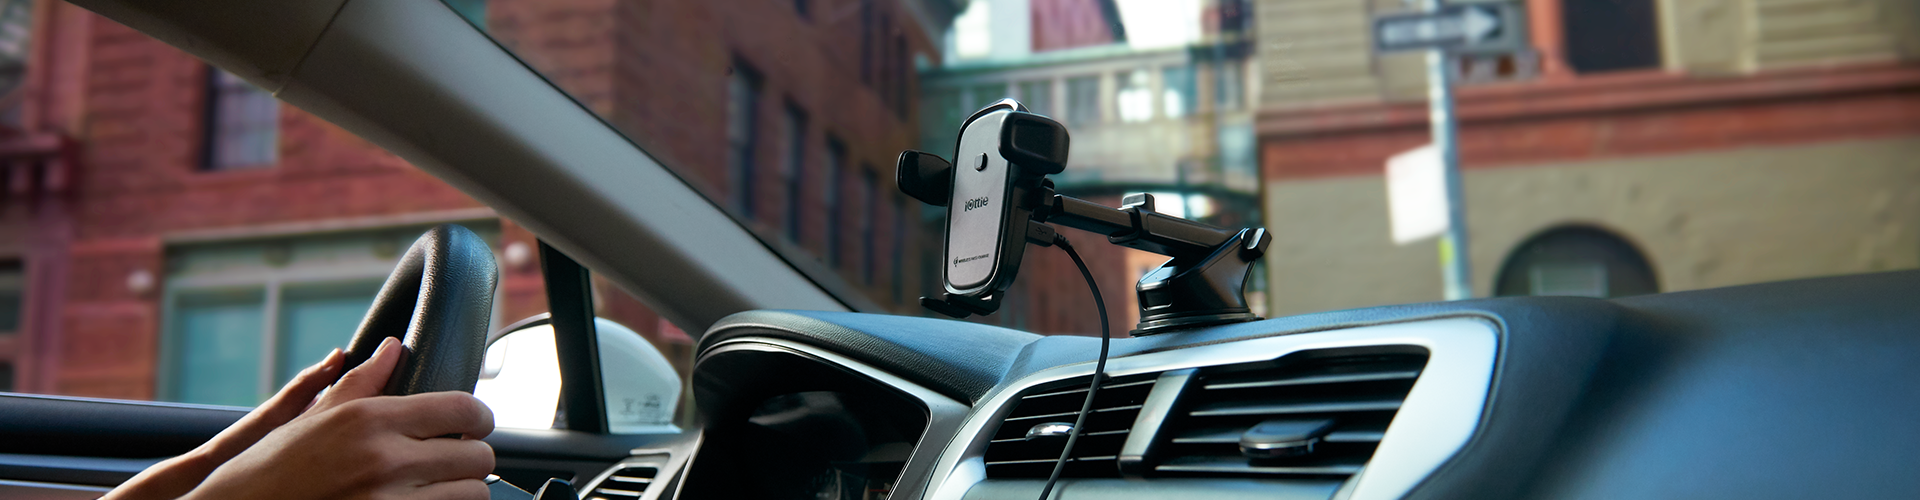 easy one touch wireless 2 mounted on car dashboard, dash mount, phone mount